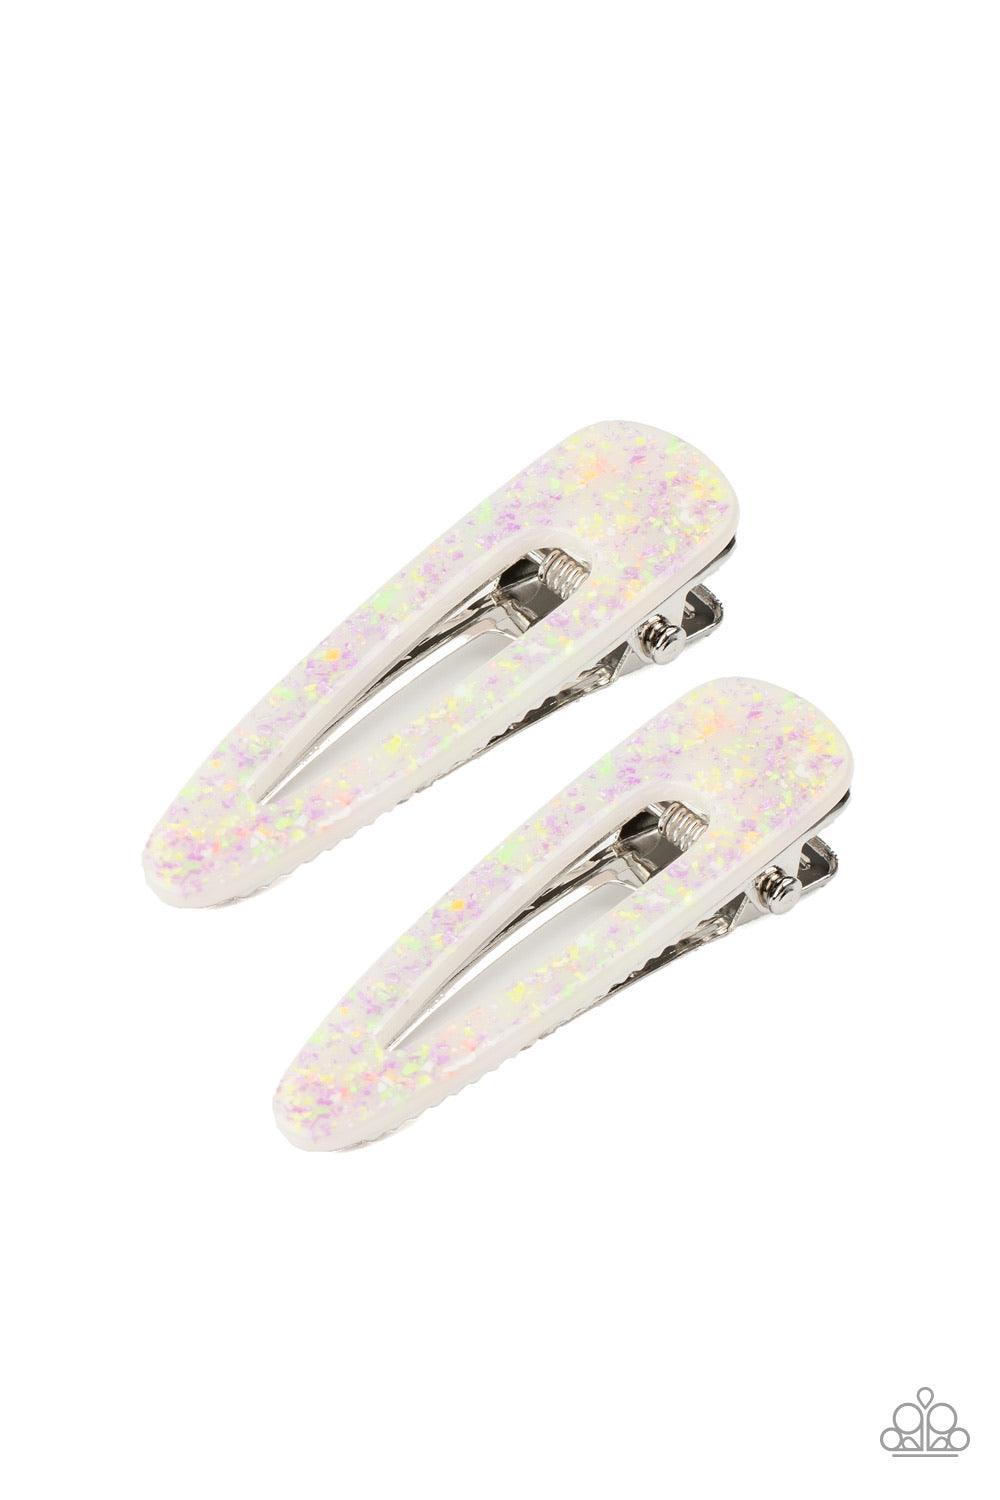 Paparazzi Accessories A CLIP Off The Old Block - Multi Featuring an iridescent speckled pattern, a pair of colorful acrylic hair clips pull back the hair for a retro inspired look. Features standard hair clips. Sold as one pair of hair clips. Brooches & L